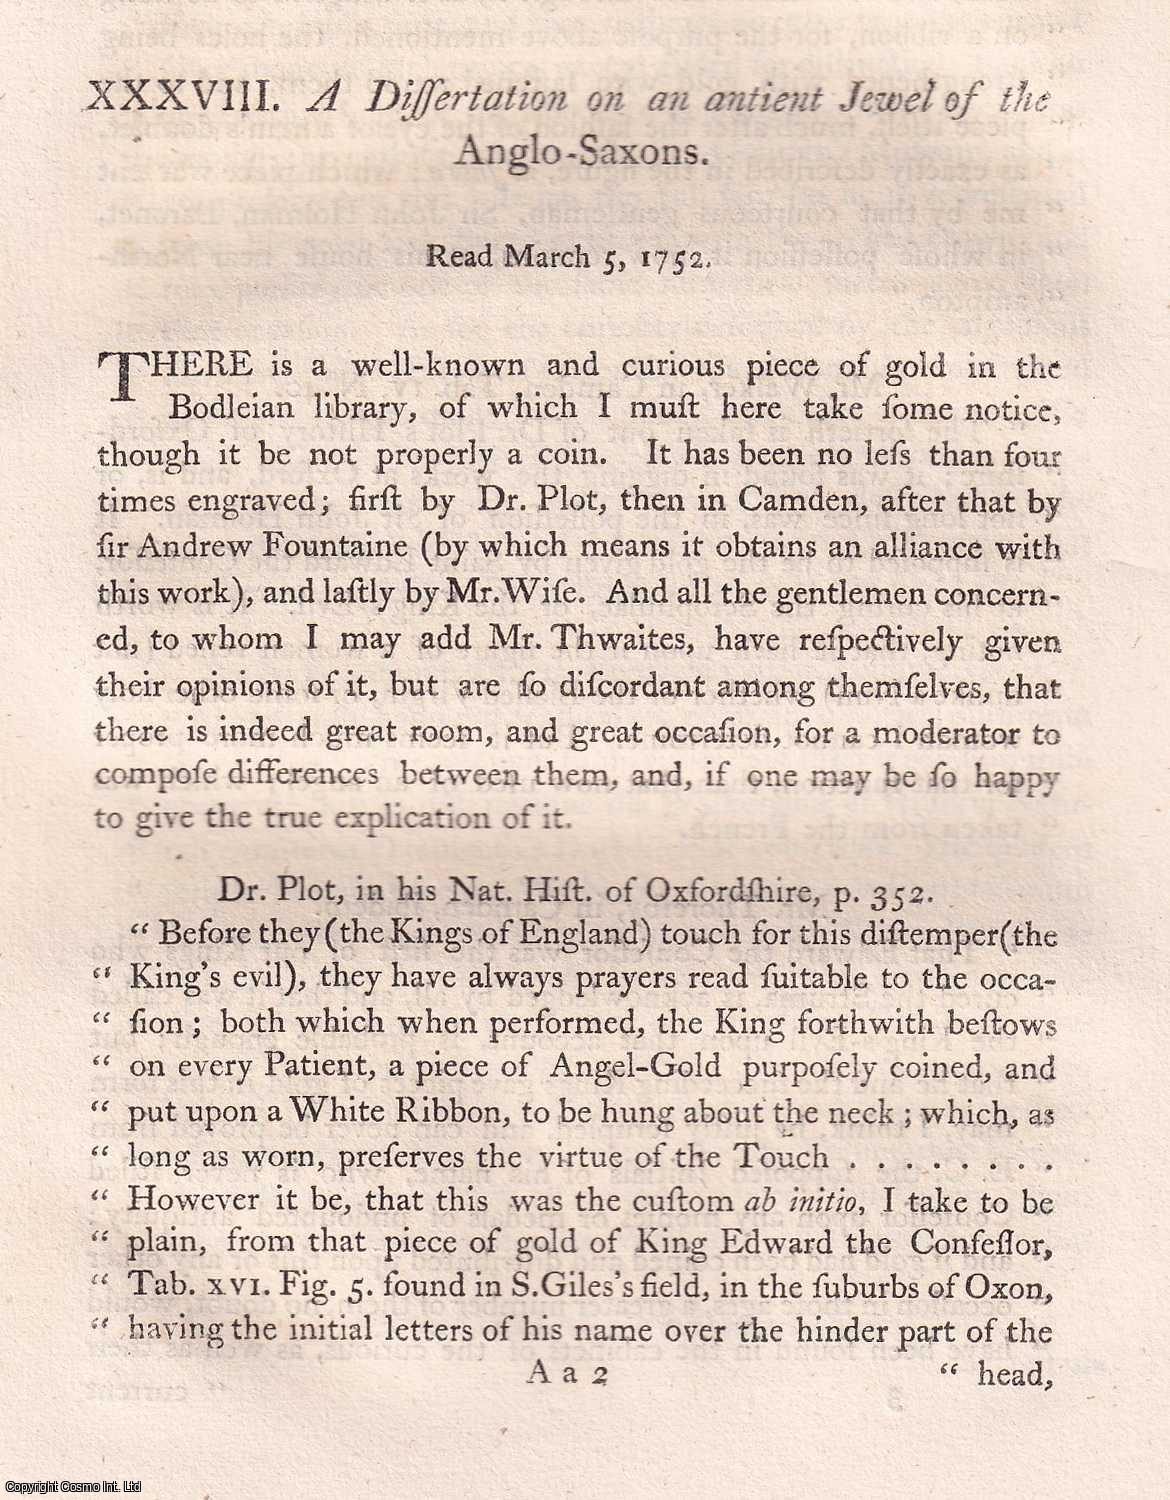 Samuel Pegge - A Dissertation on an ancient Jewel of the Anglo-Saxons. An uncommon original article from the journal Archaeologia, 1770.